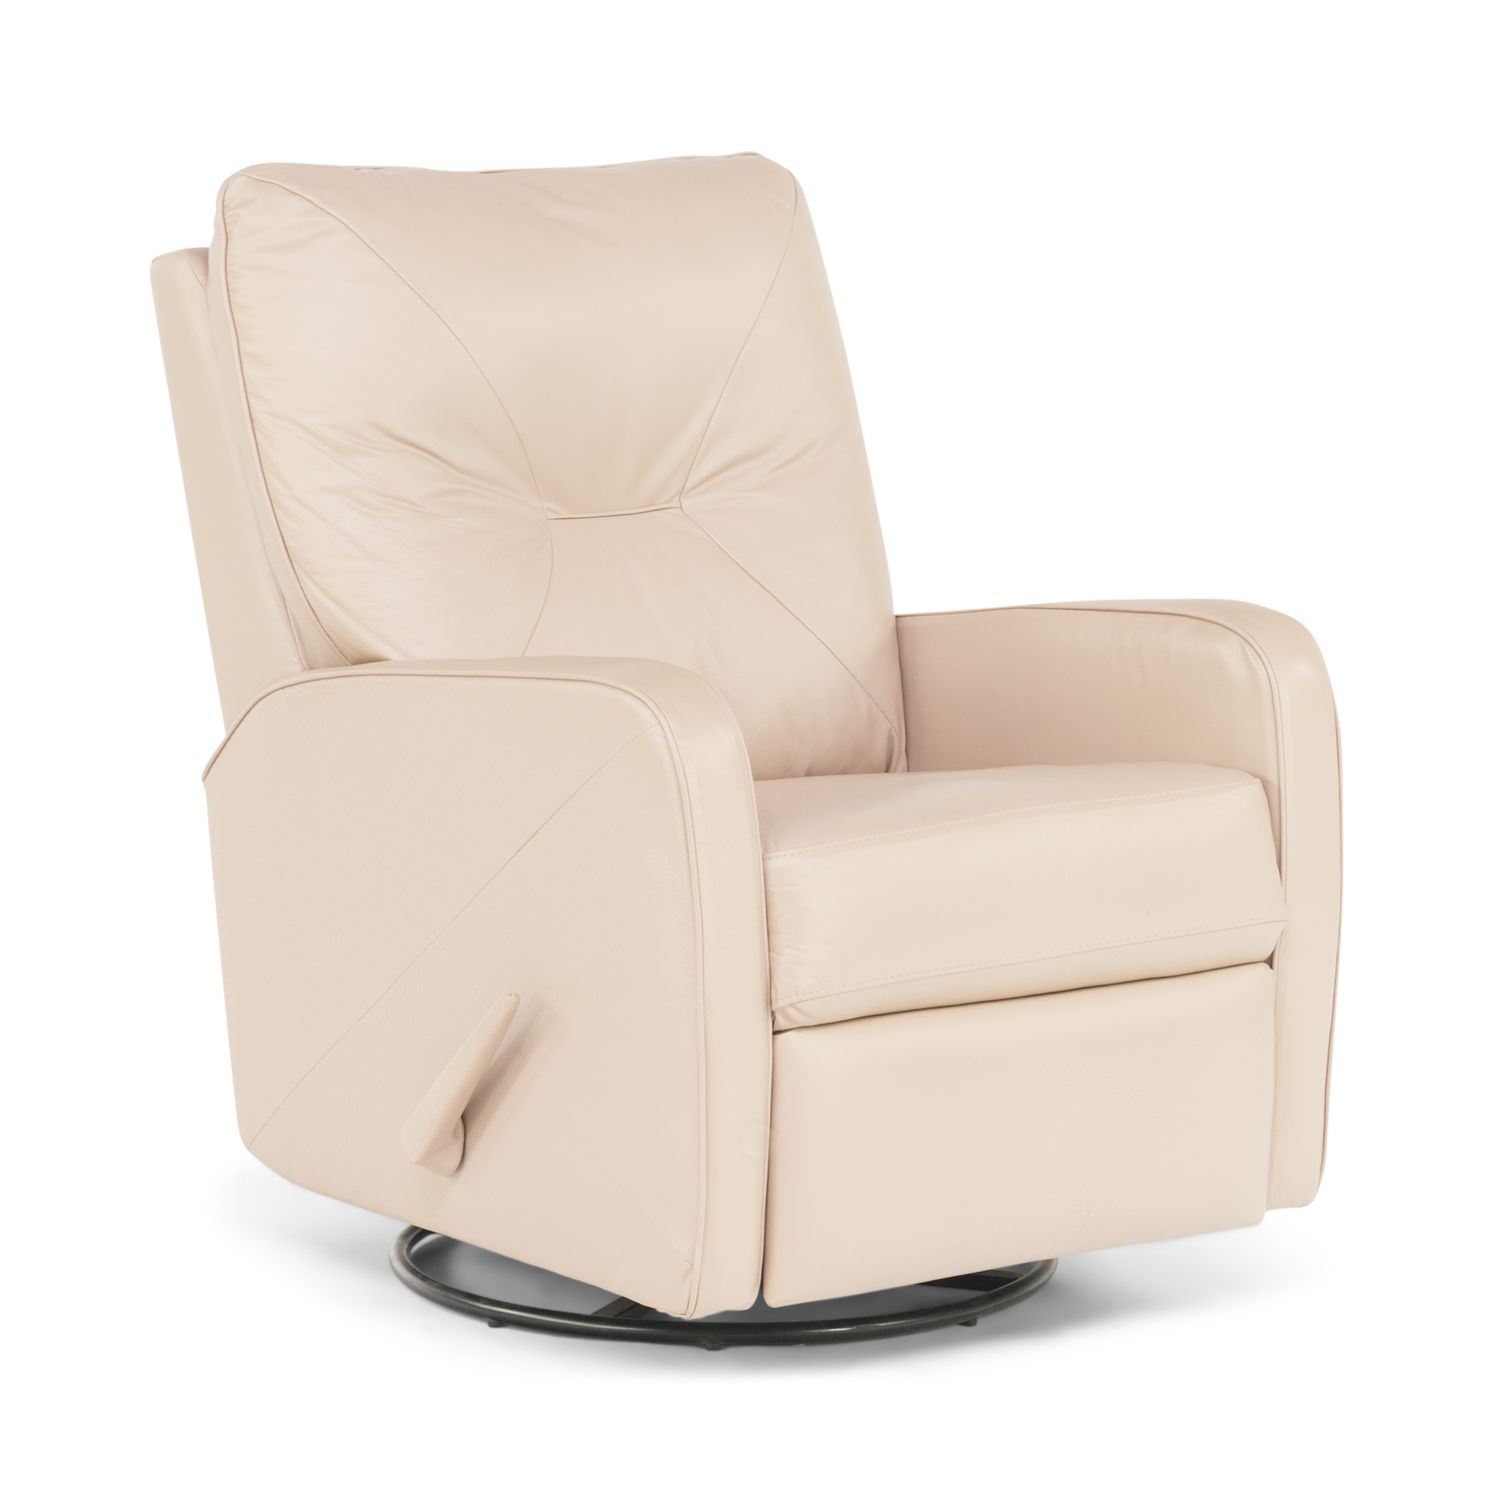 Theo Leather Swivel Rocker Recliner | Hom Furniture With Regard To Theo Ii Swivel Chairs (View 1 of 20)